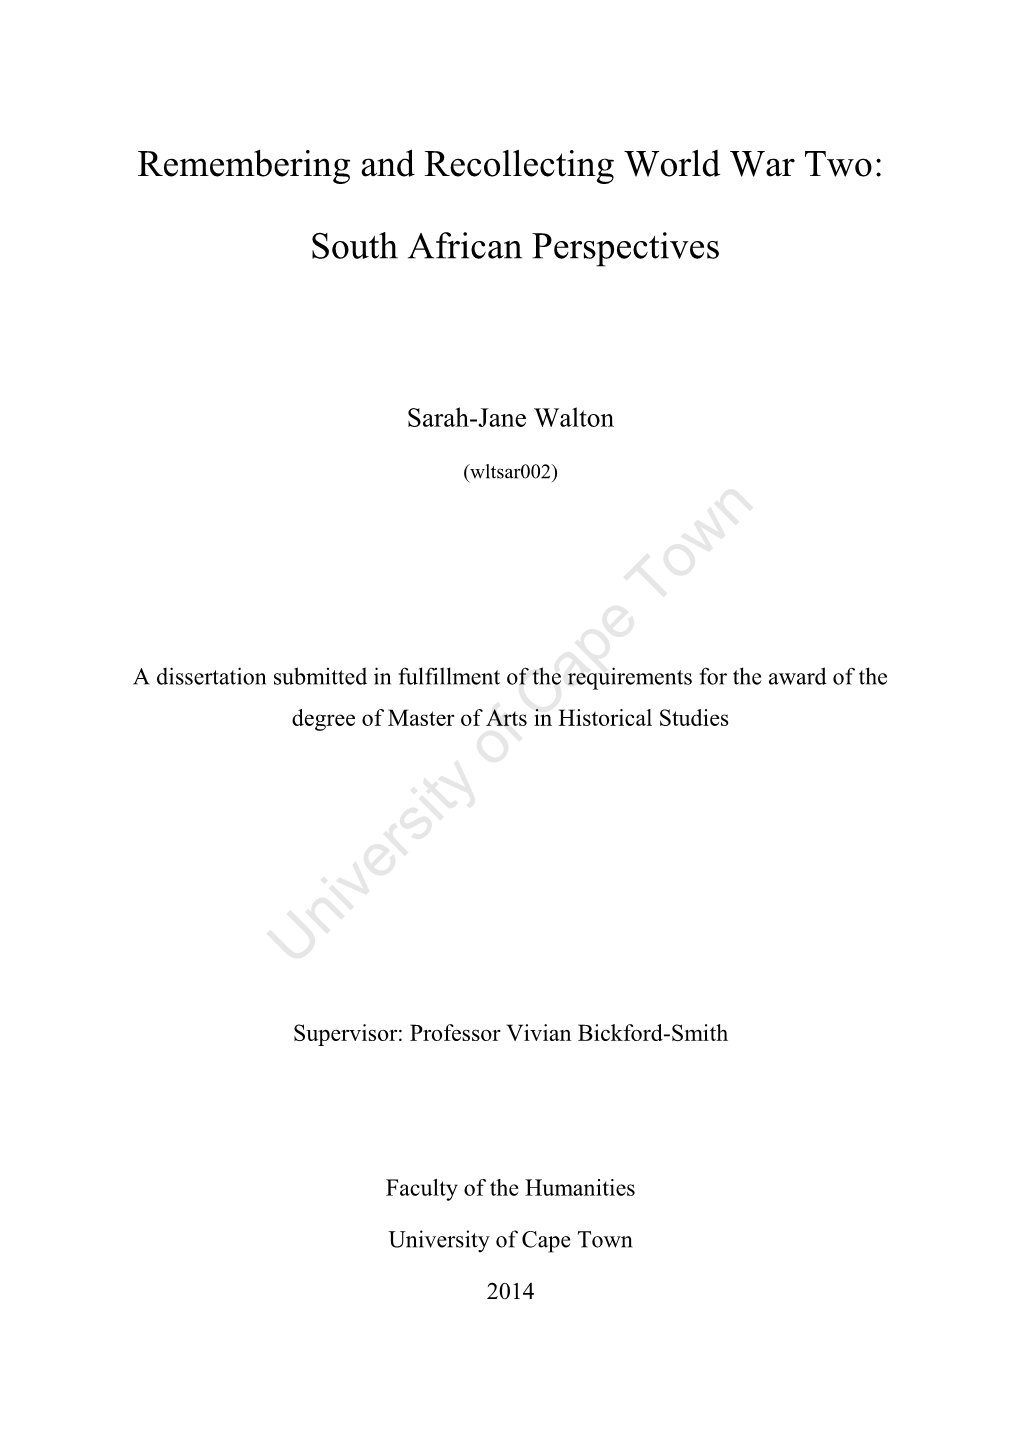 Remembering and Recollecting World War 2: South African Perspectives